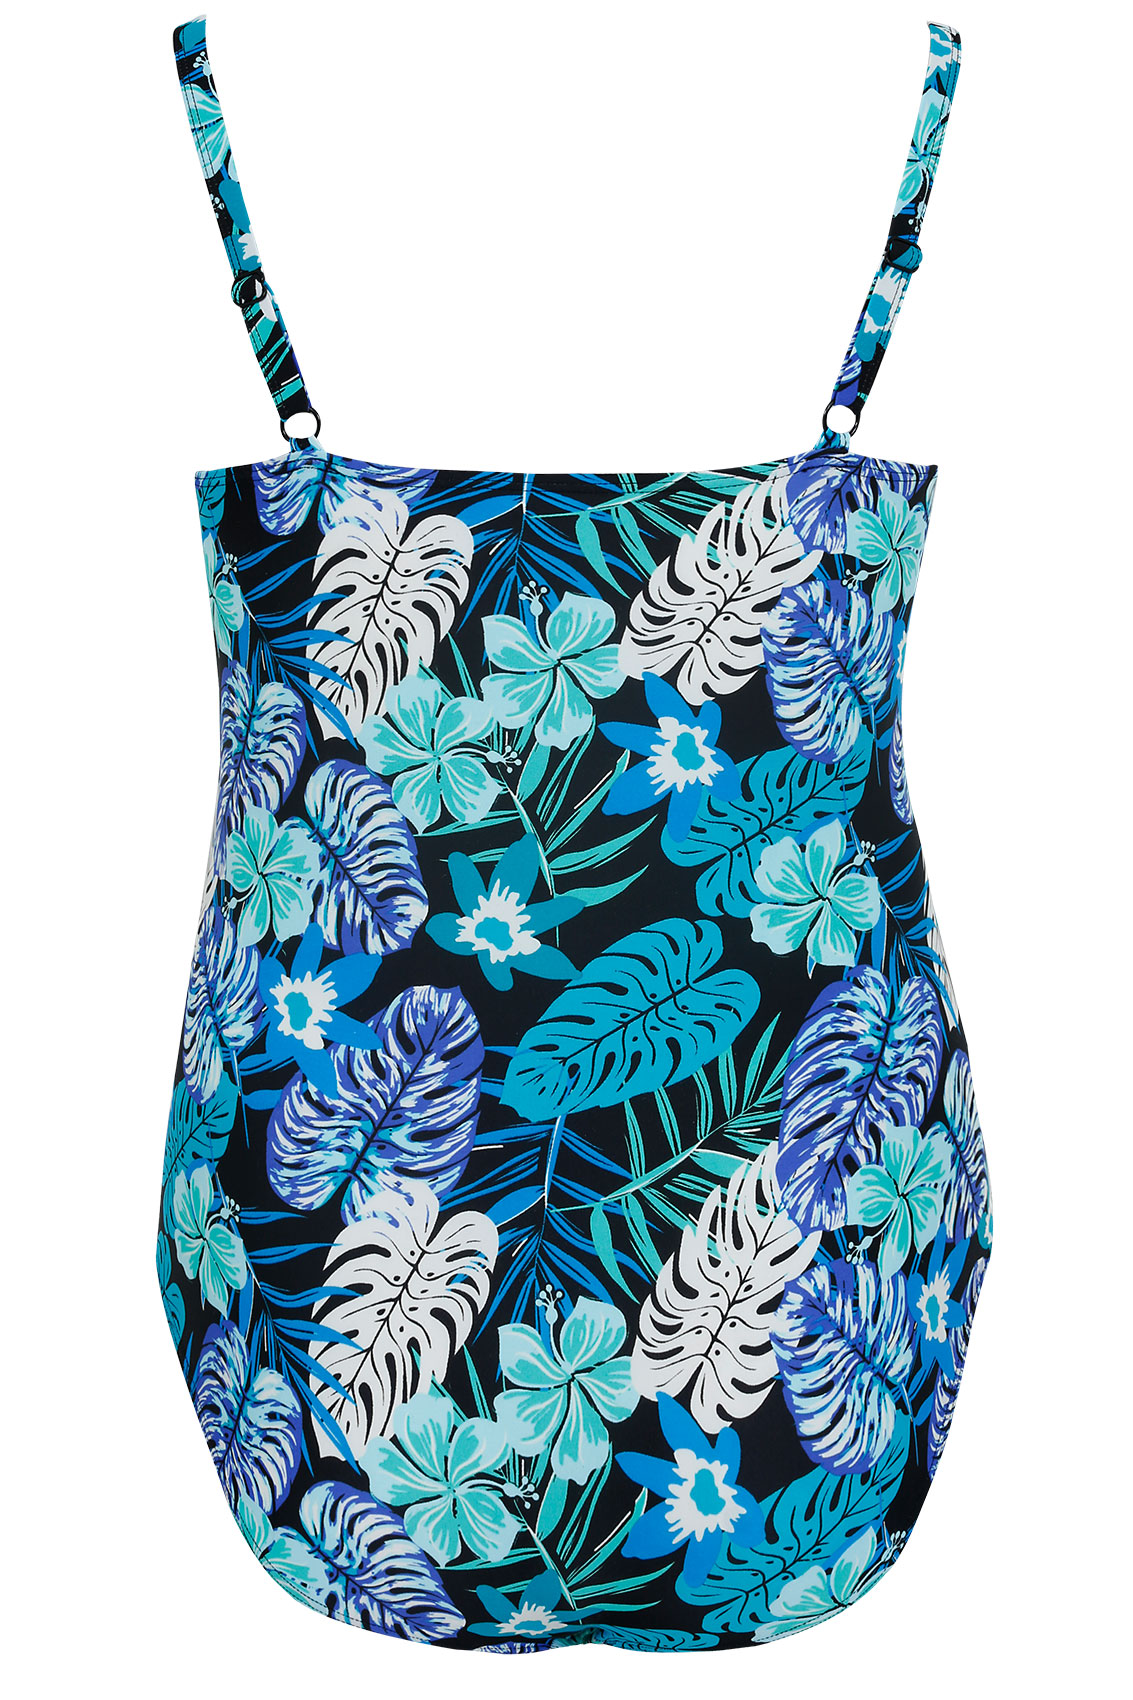 Blue & Green Tropical Hawaiian Print Swimsuit Plus Size 16 to 32